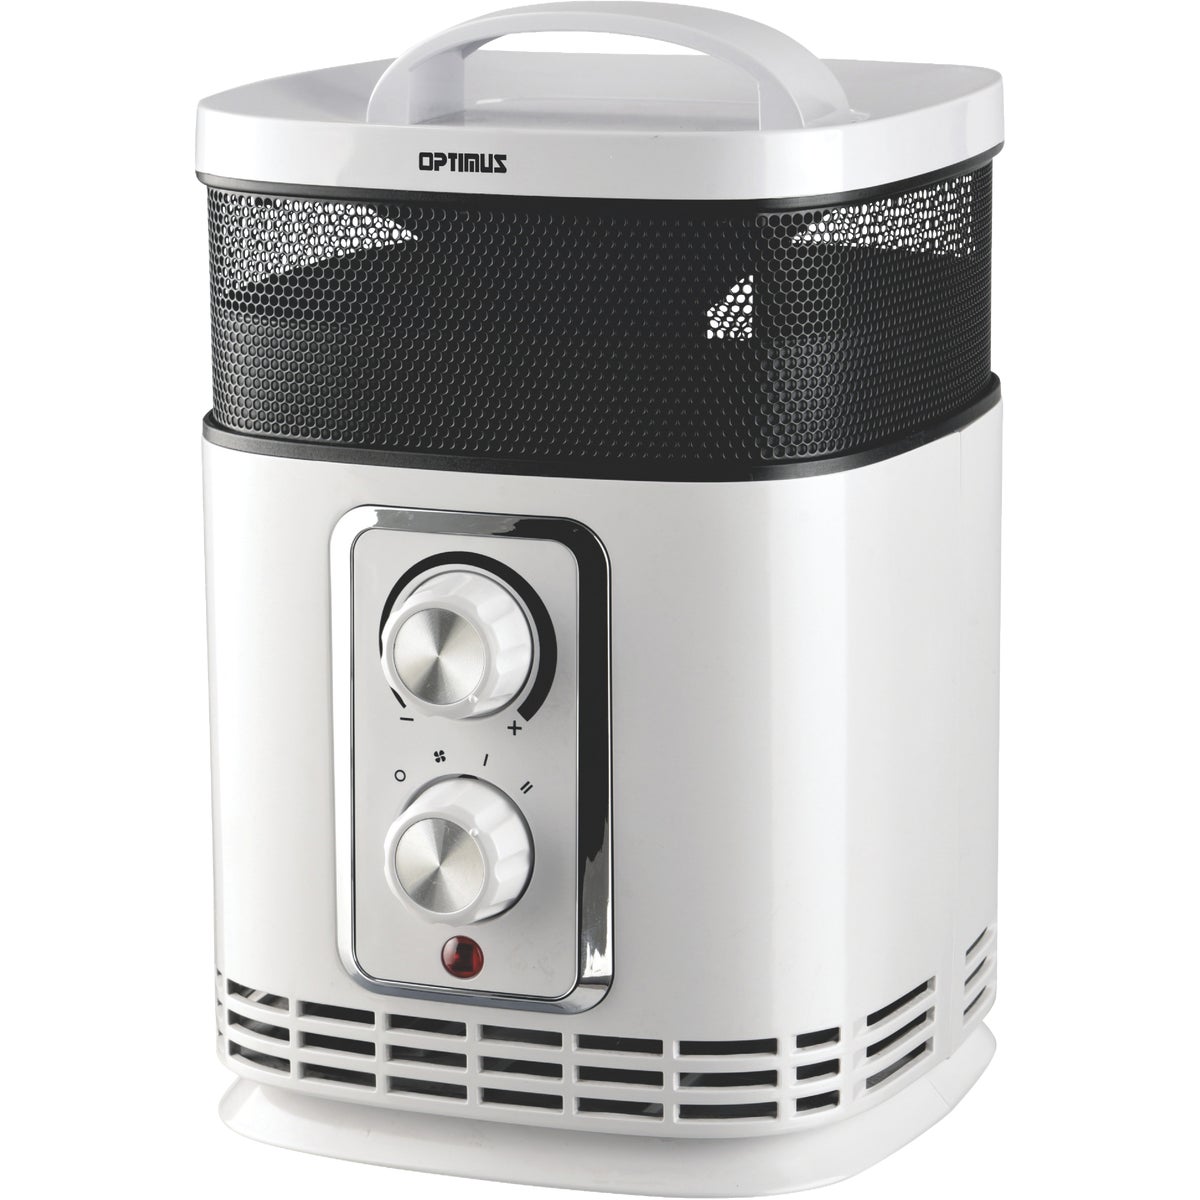 Item 491004, Portable ceramic heater with thermostat.